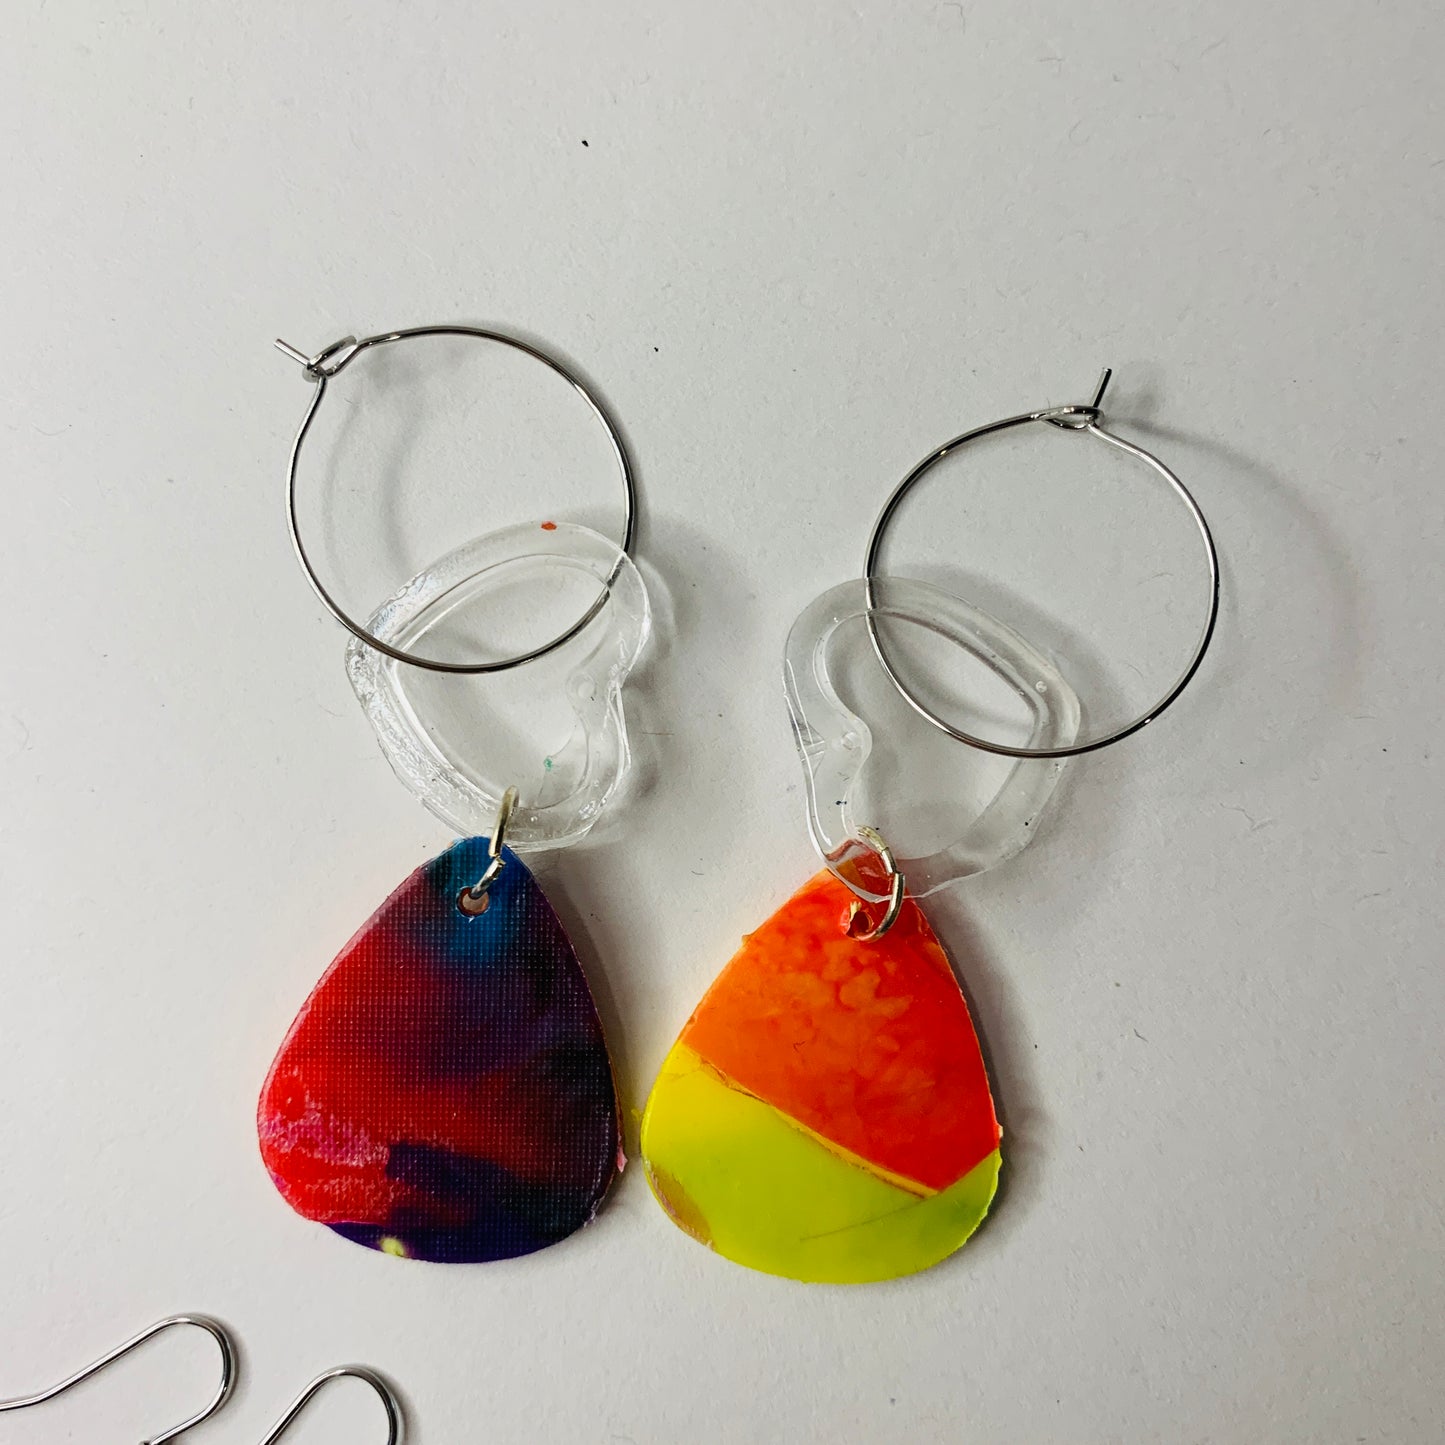 Colourful Recycled Bottle Top Earrings